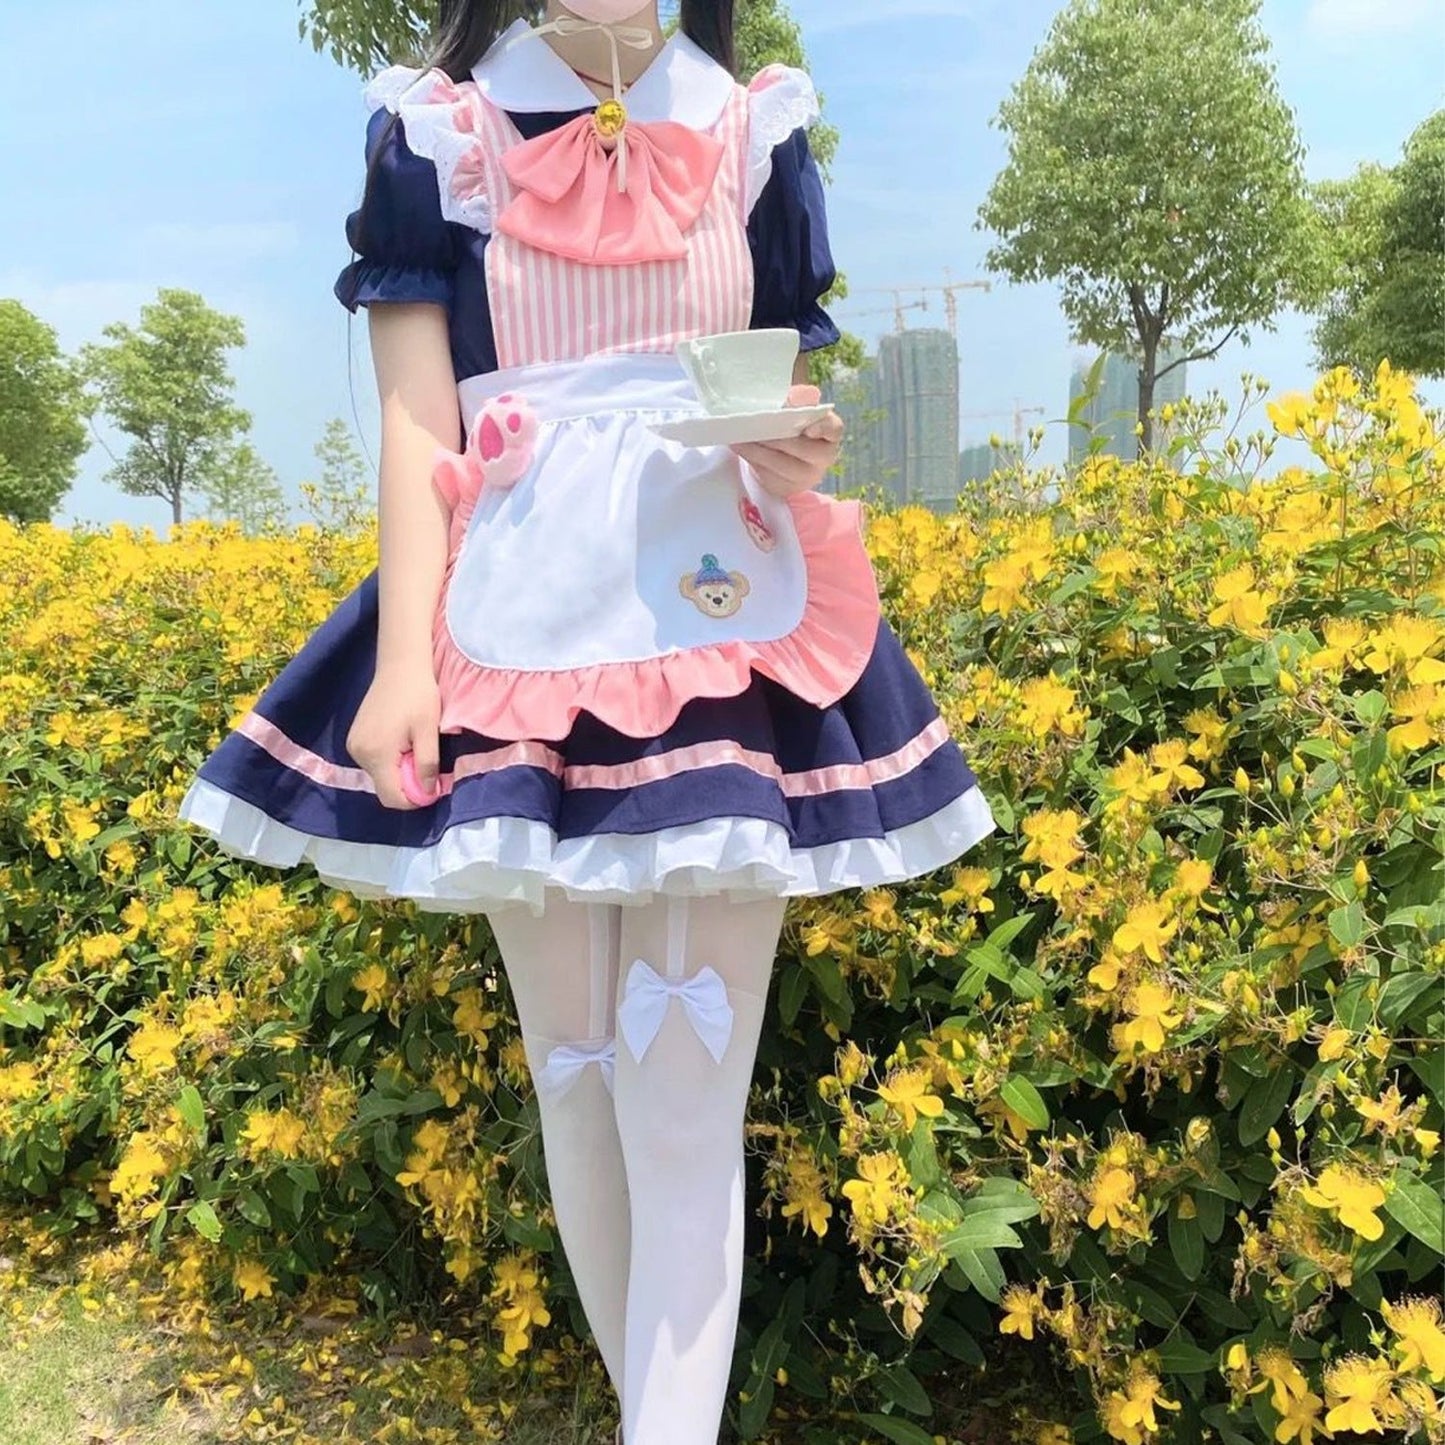 Cafe Waiter Cute Maid Outfit Lolita Princess Dress Japanese Fancy Dress Cosplay Costume